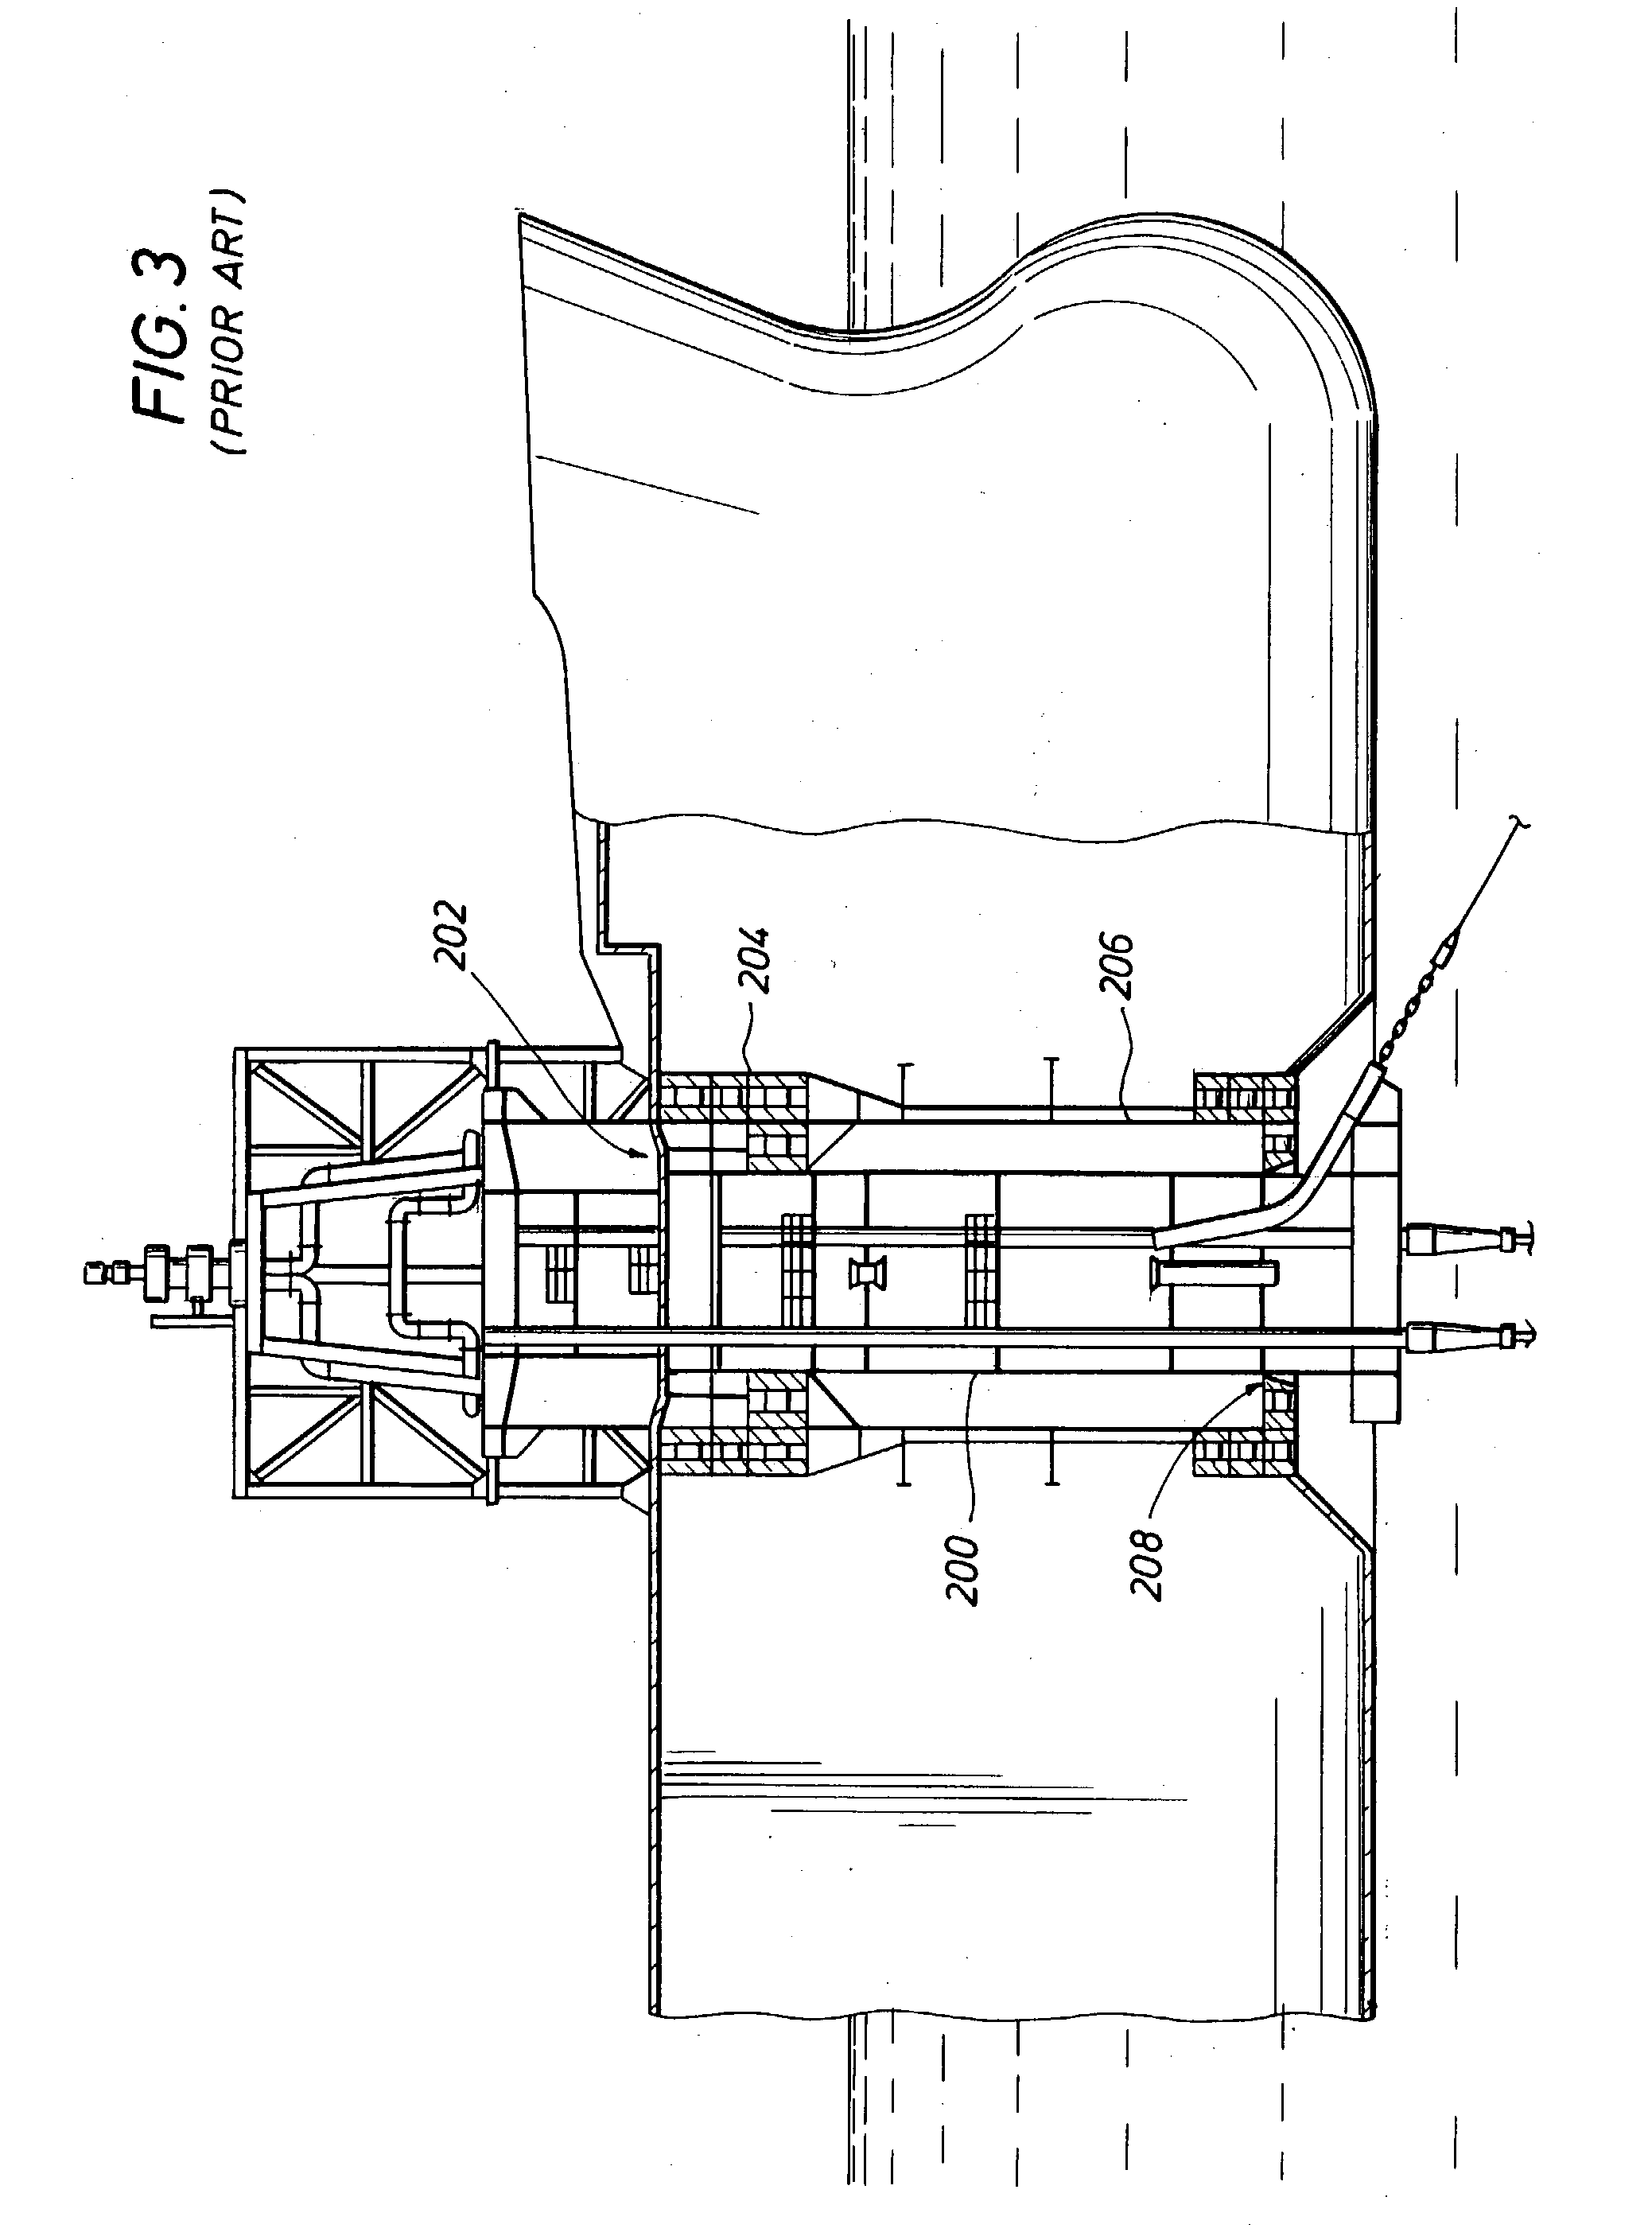 Large diameter mooring turret with compliant deck and frame